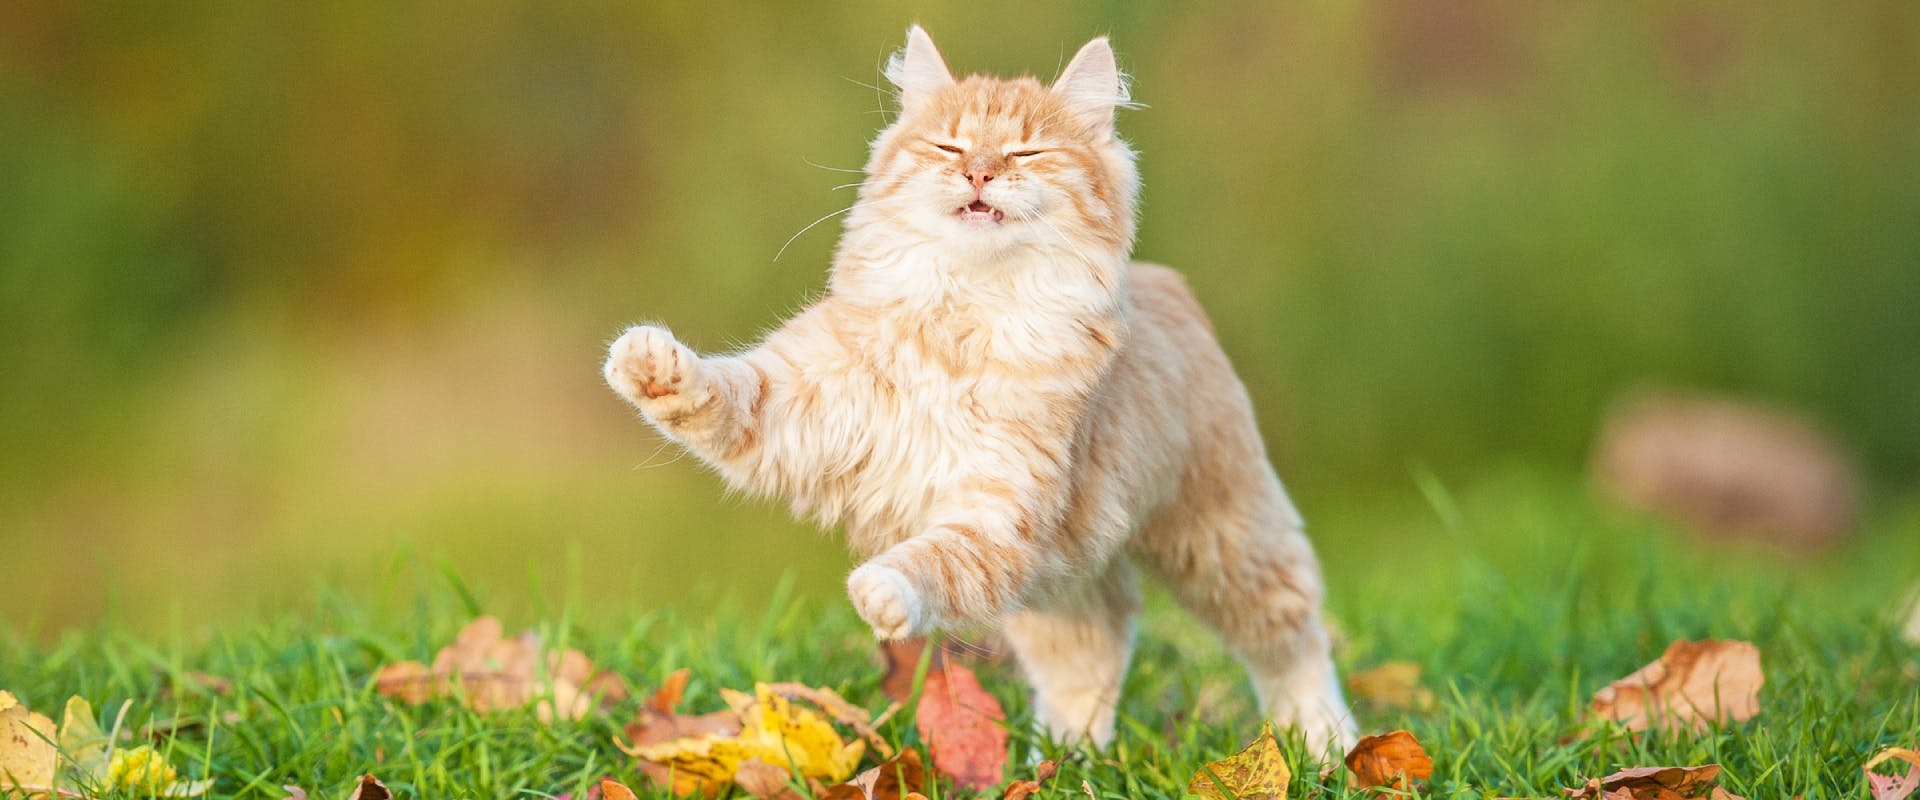 long haired ginger cat jumping through the grass